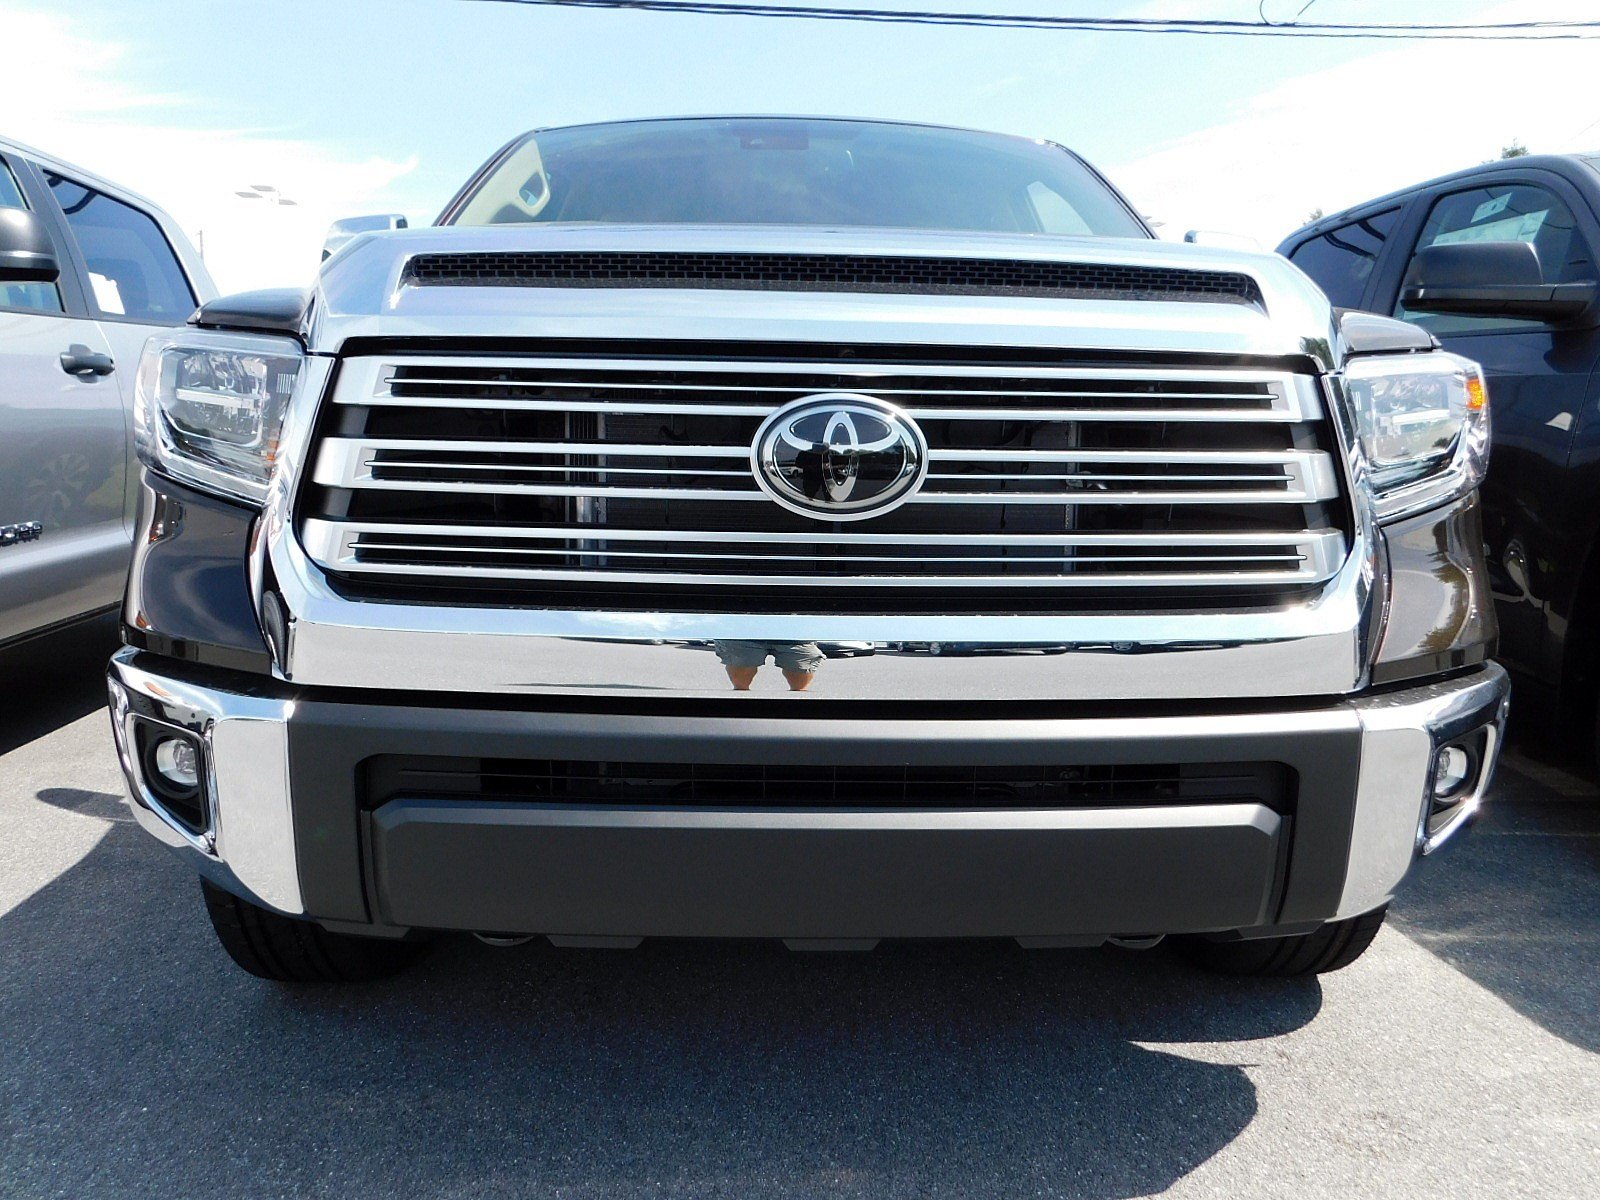 New 2020 Toyota Tundra Limited Double Cab in East Petersburg #13535